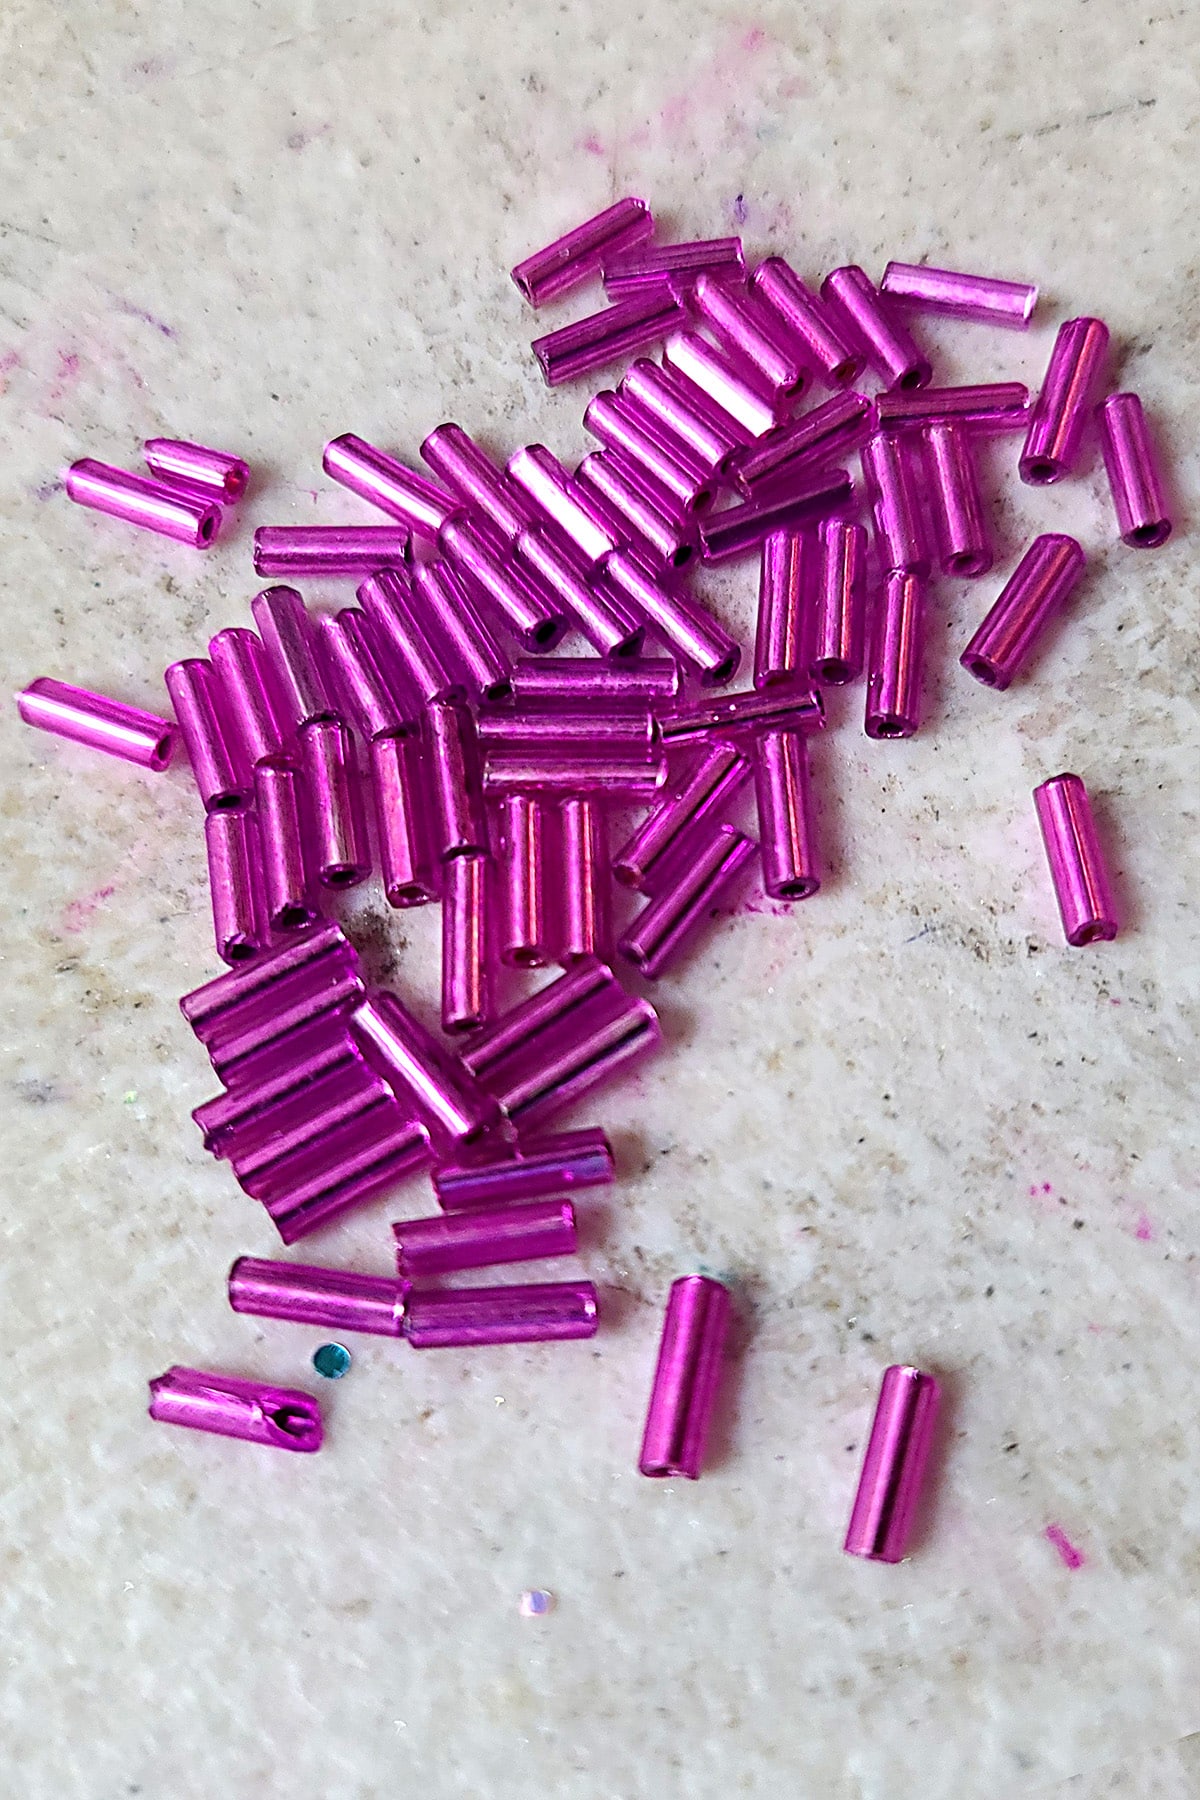 A very close up view of a pile of dark pink bugle beads.